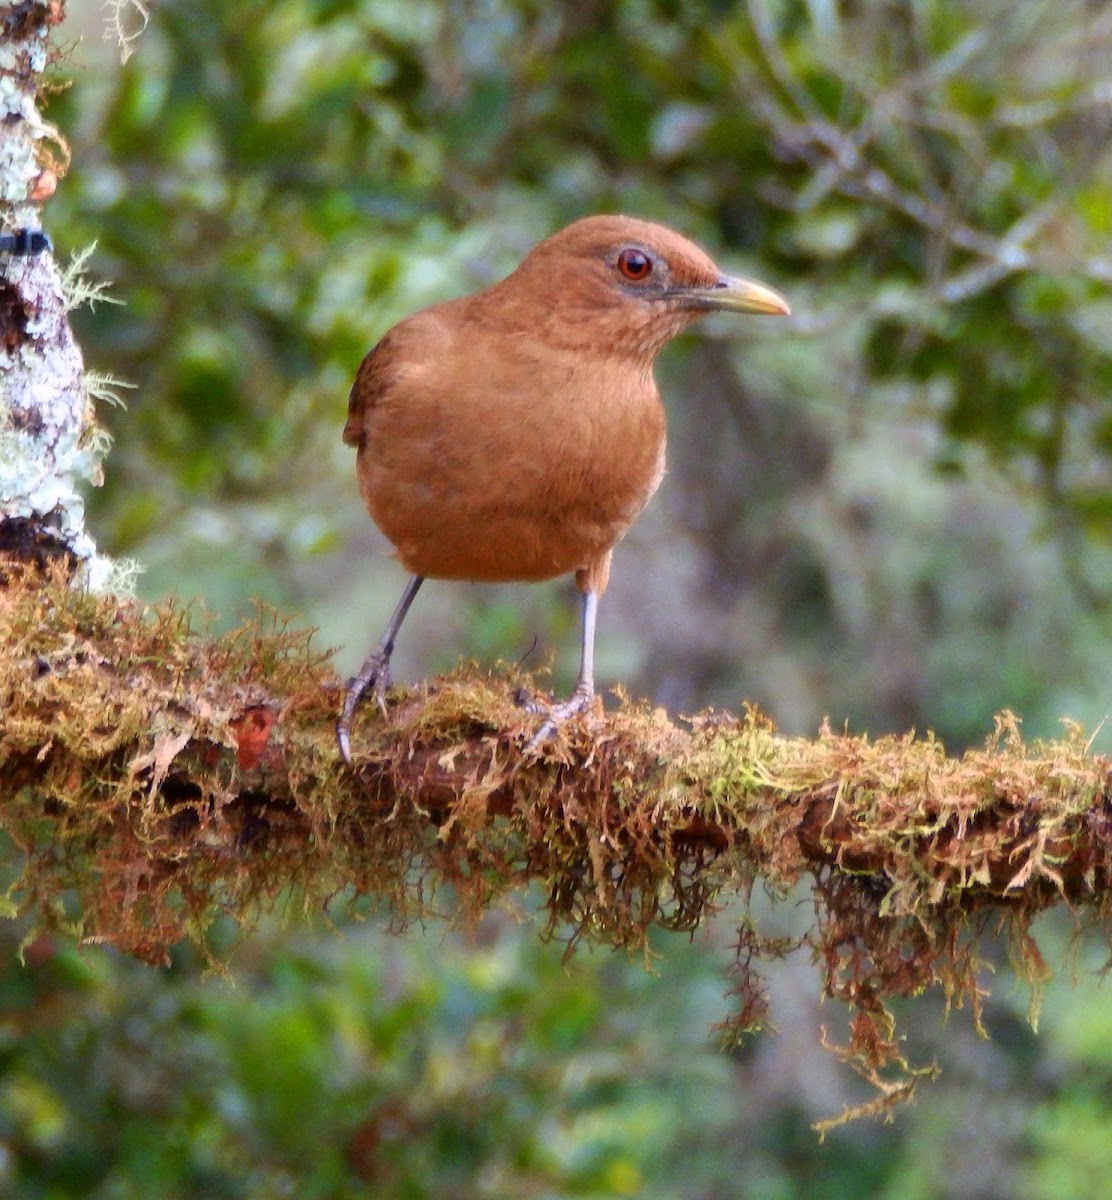 Clay-colored thrush